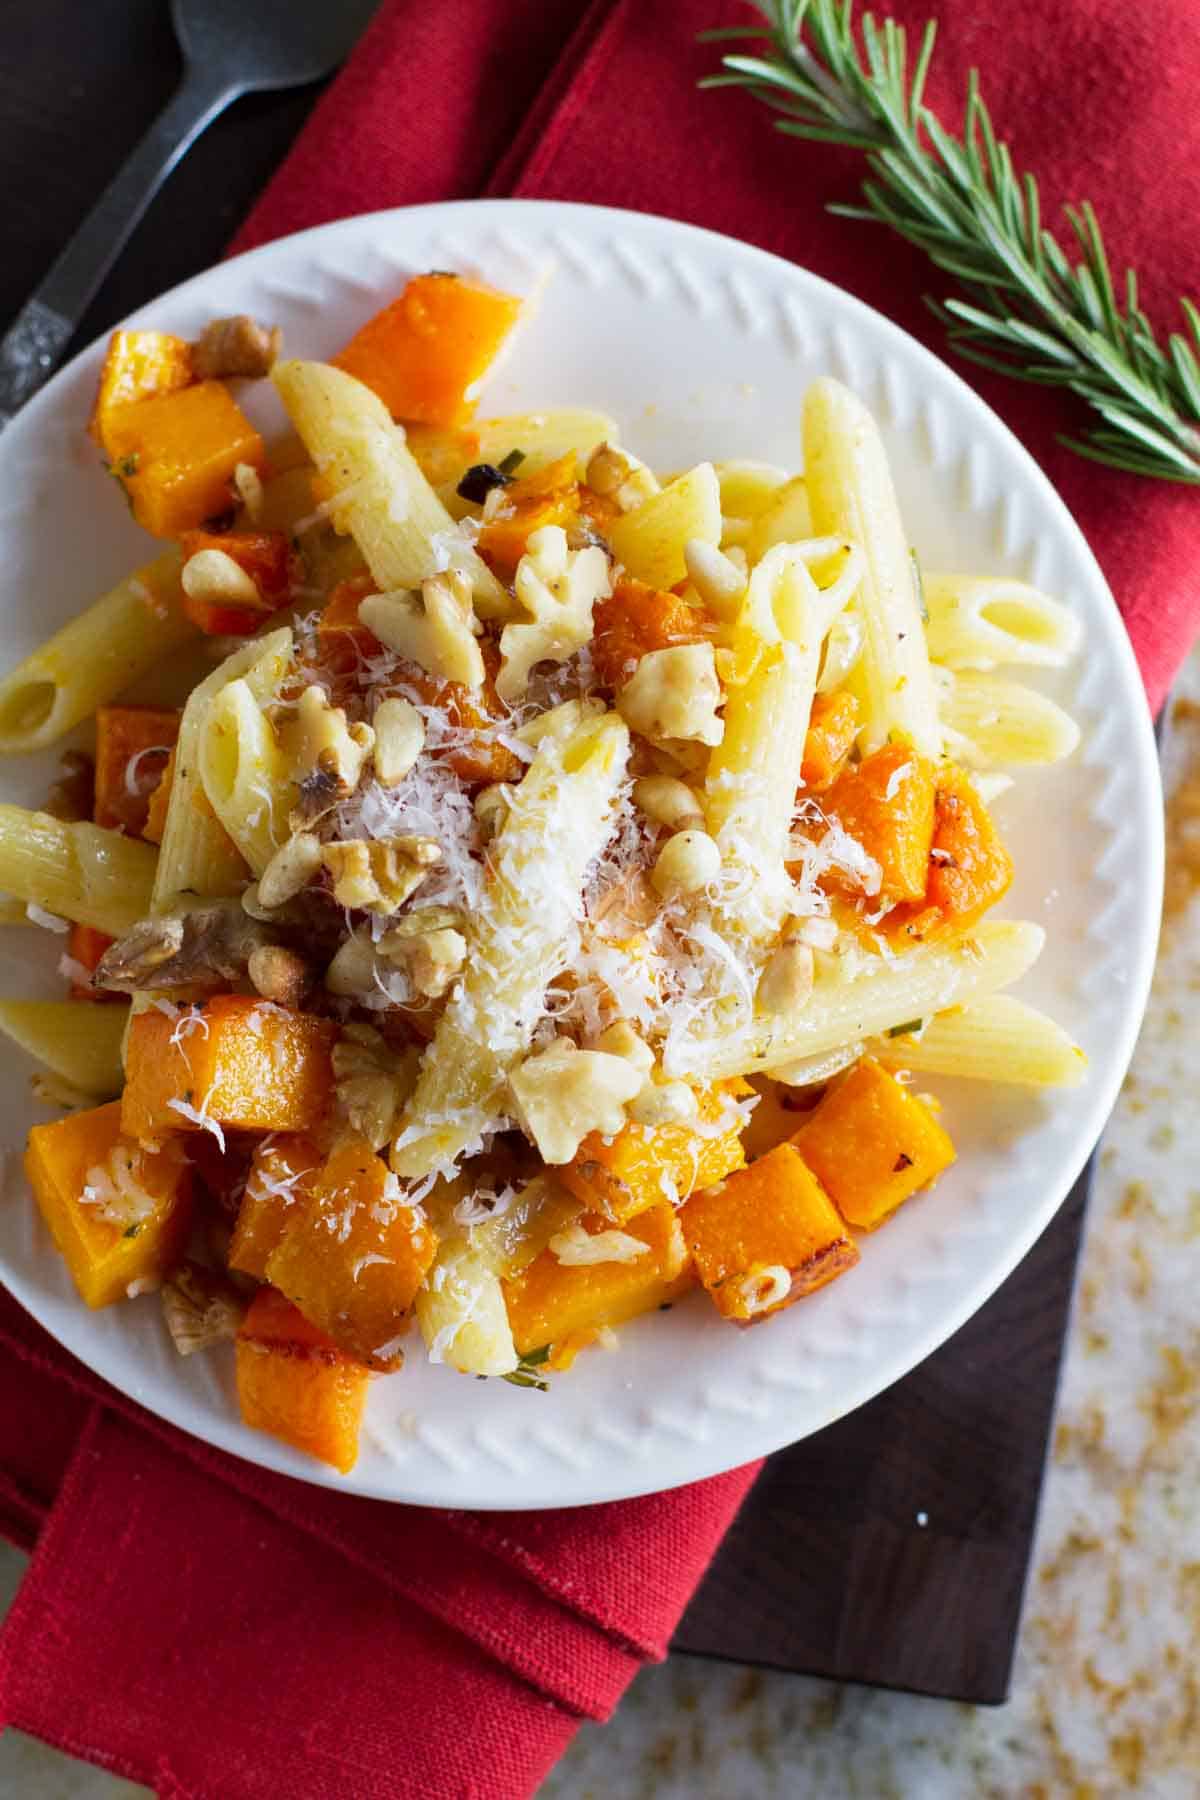 Plate filled with penne pasta, roasted butternut squash, walnuts, and rosemary.